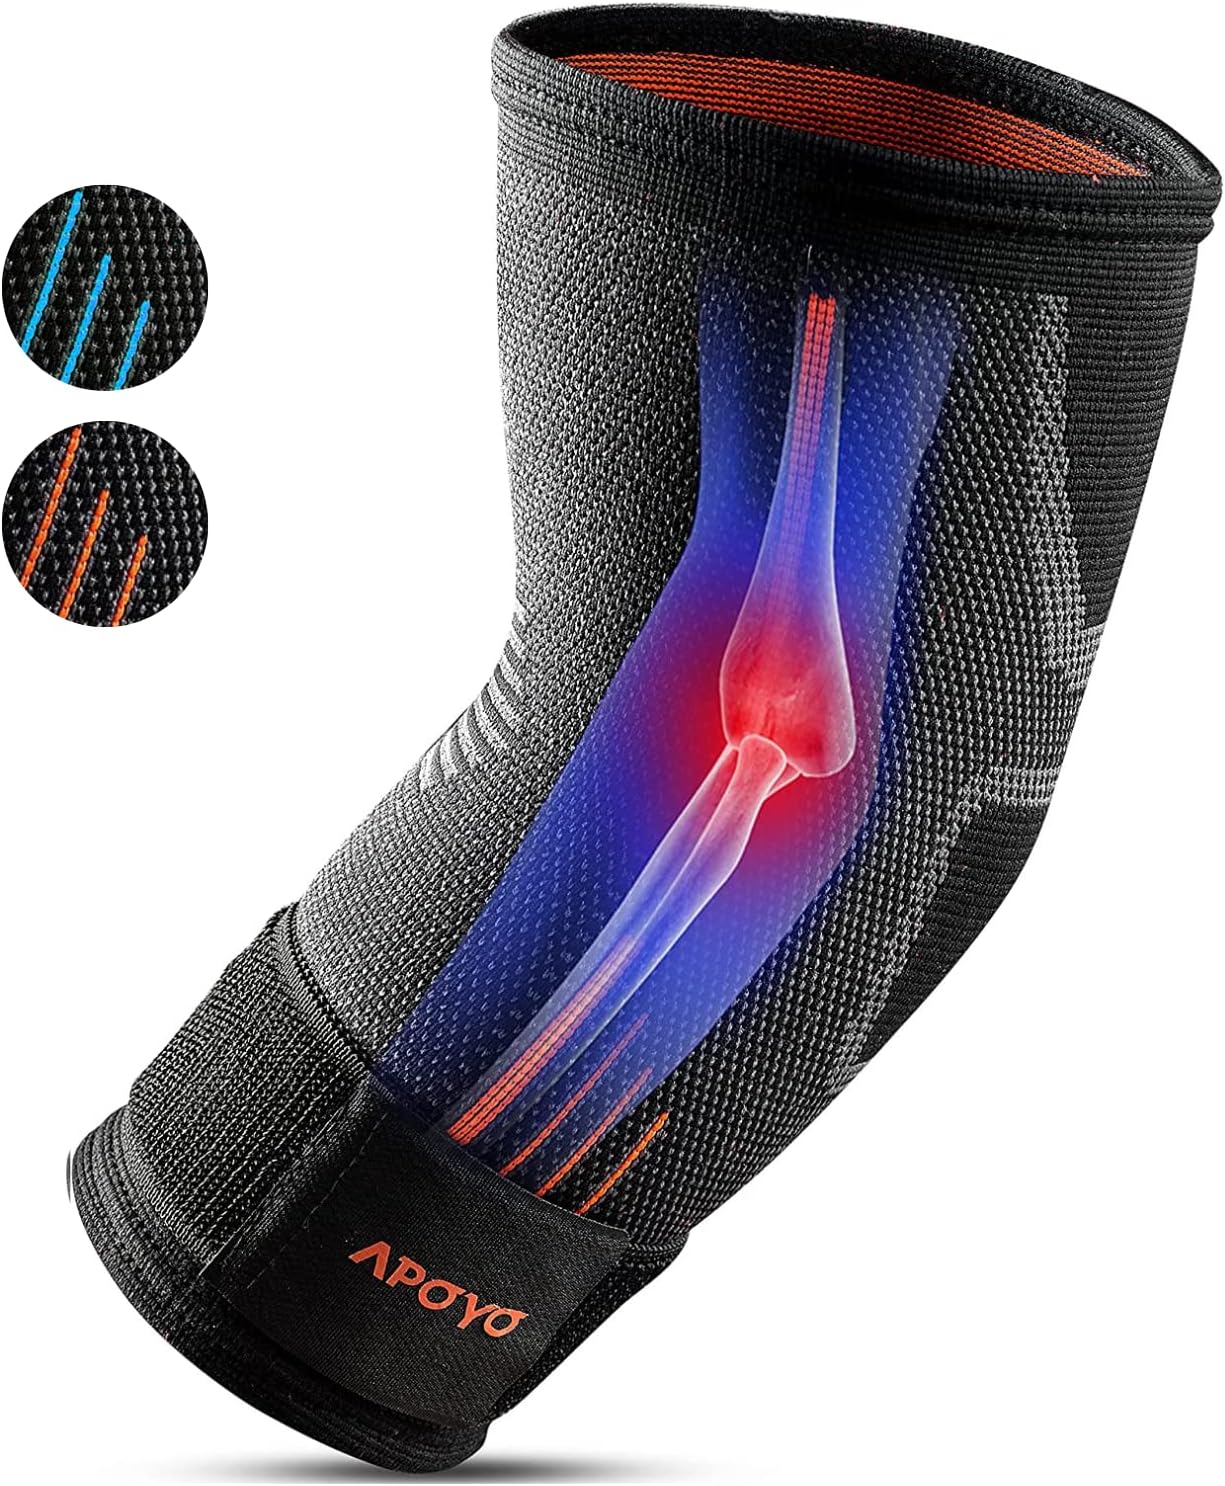 Elbow Brace For Tendonitis, Compression Sleeve, Athletic Elbow Support for Basketball, Weightlifting,  More, With Adjustable Strap  Bonus Elastic Therapeutic Tape, Great for Workouts  Sports, Small